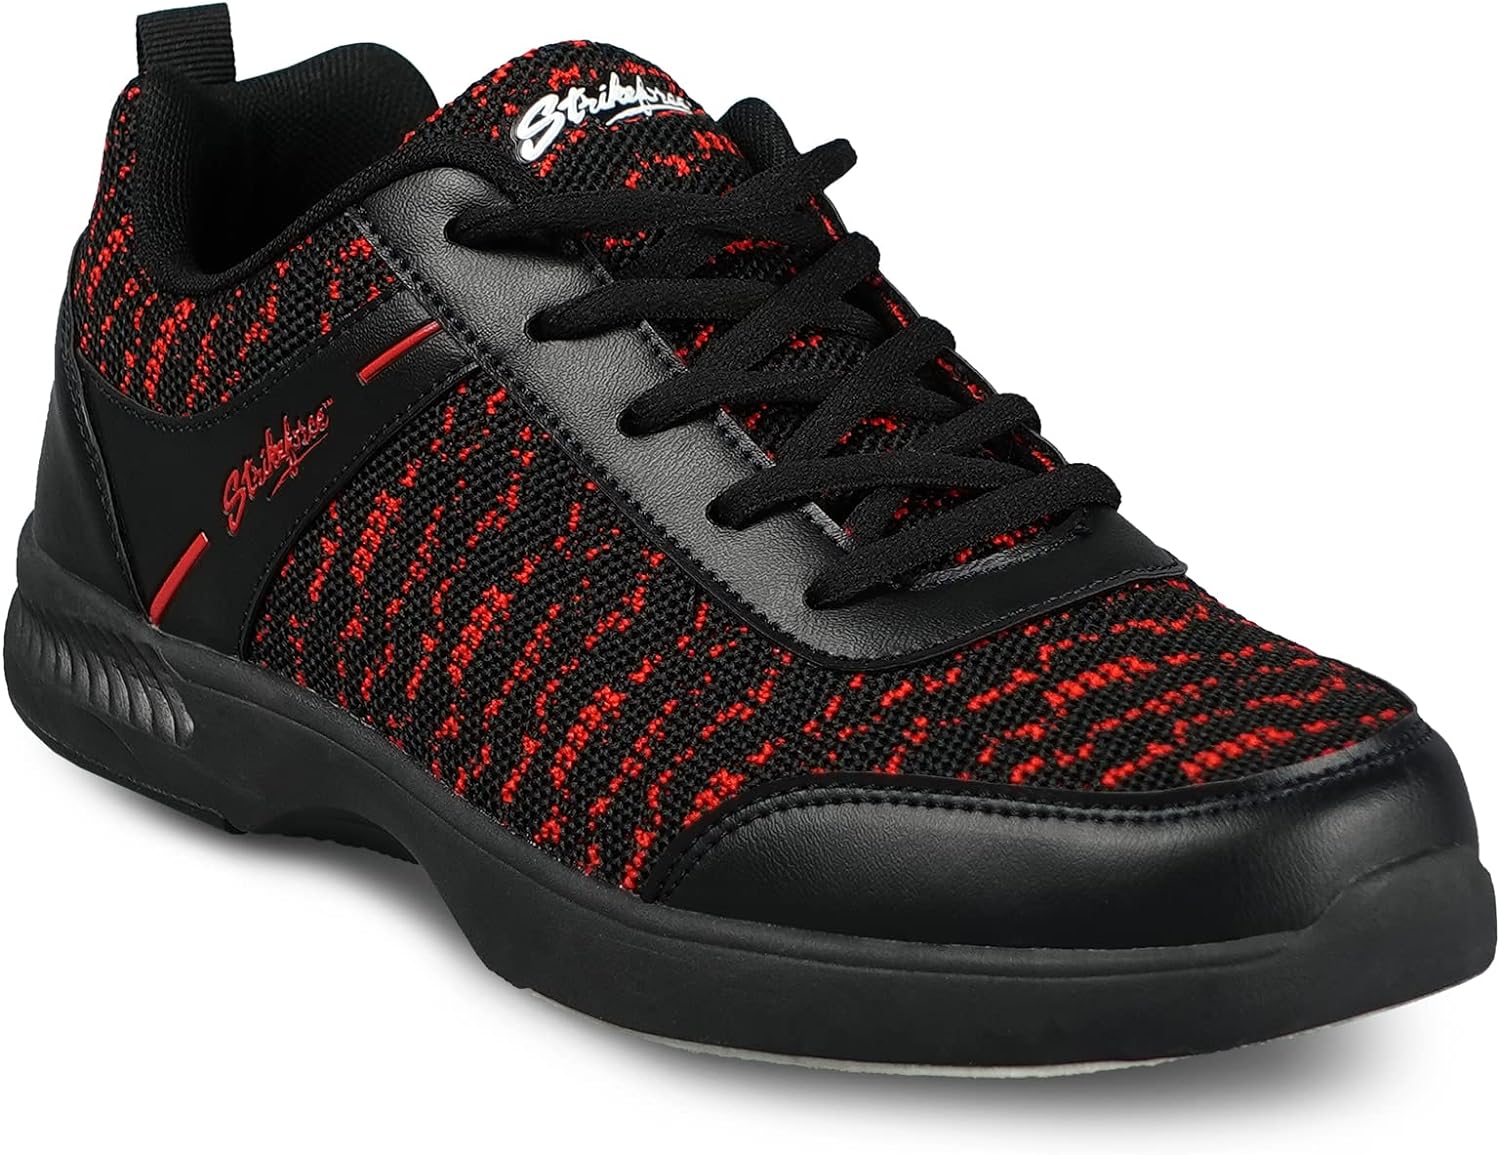 KR Strikeforce Flyer Mesh Mens Lace-Up Bowling Shoe for Right or Left Handed Bowlers